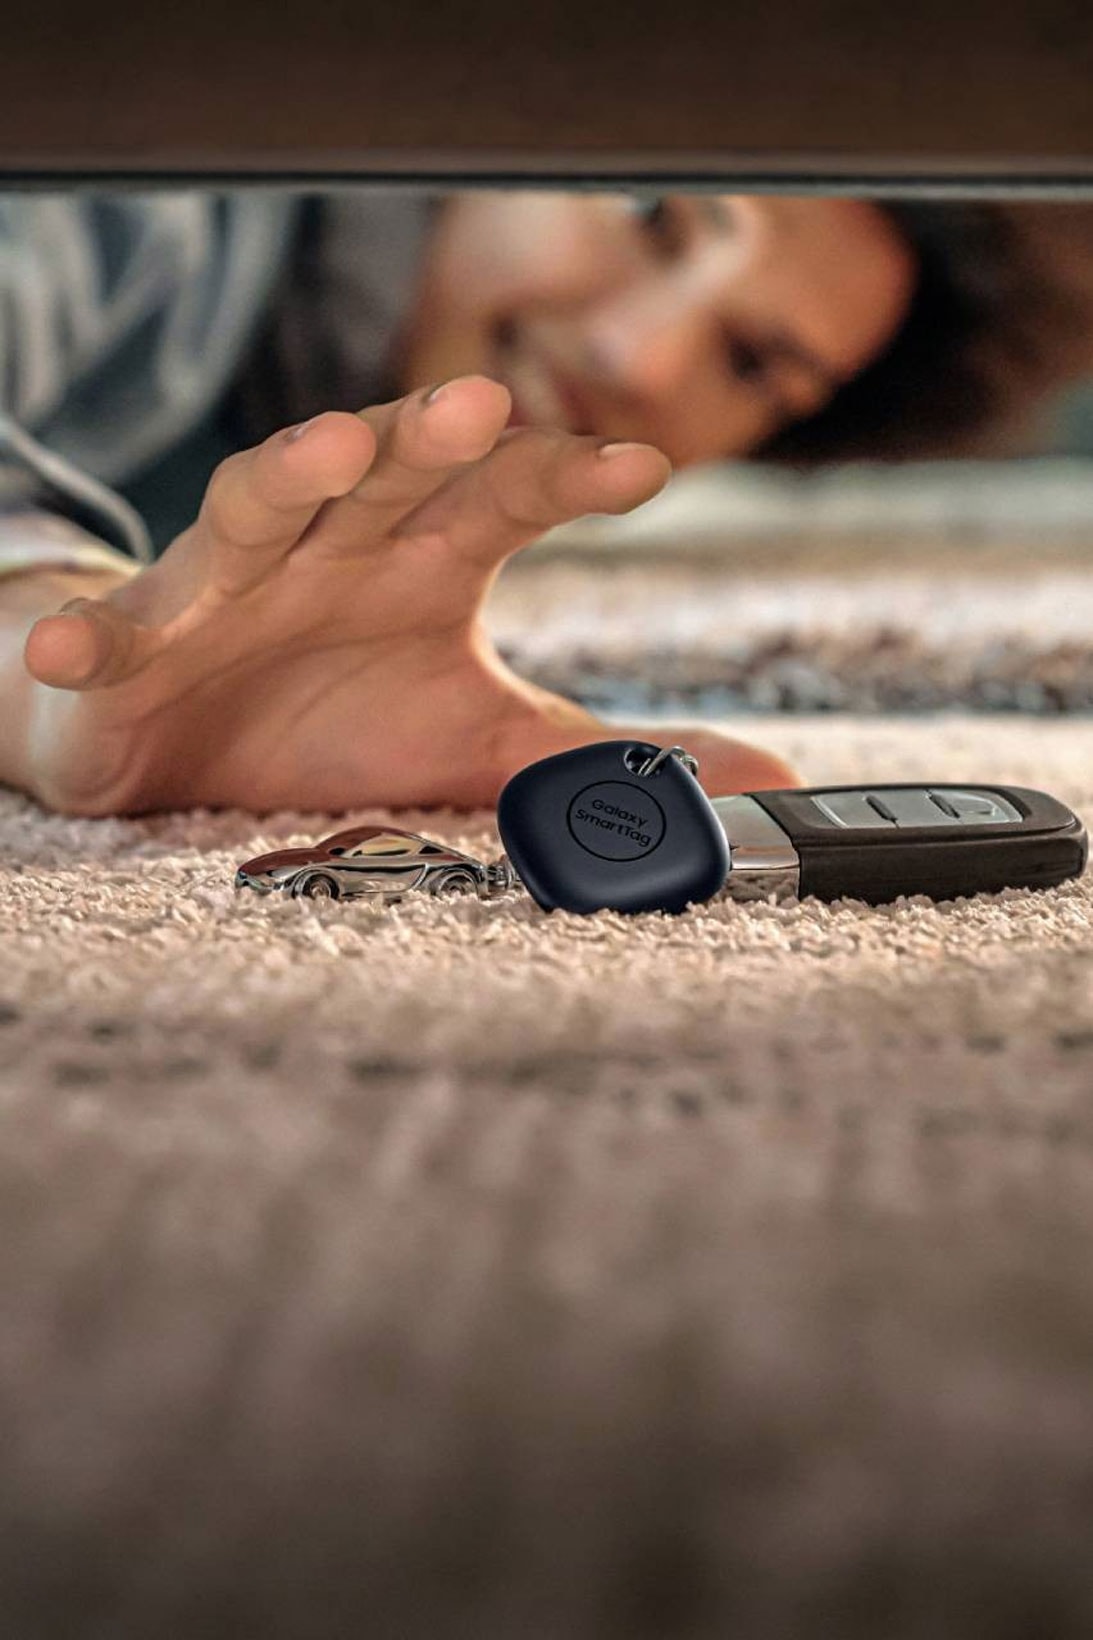 samsung galaxy smarttag tracking device accessory find lost items car keys under bed carpet